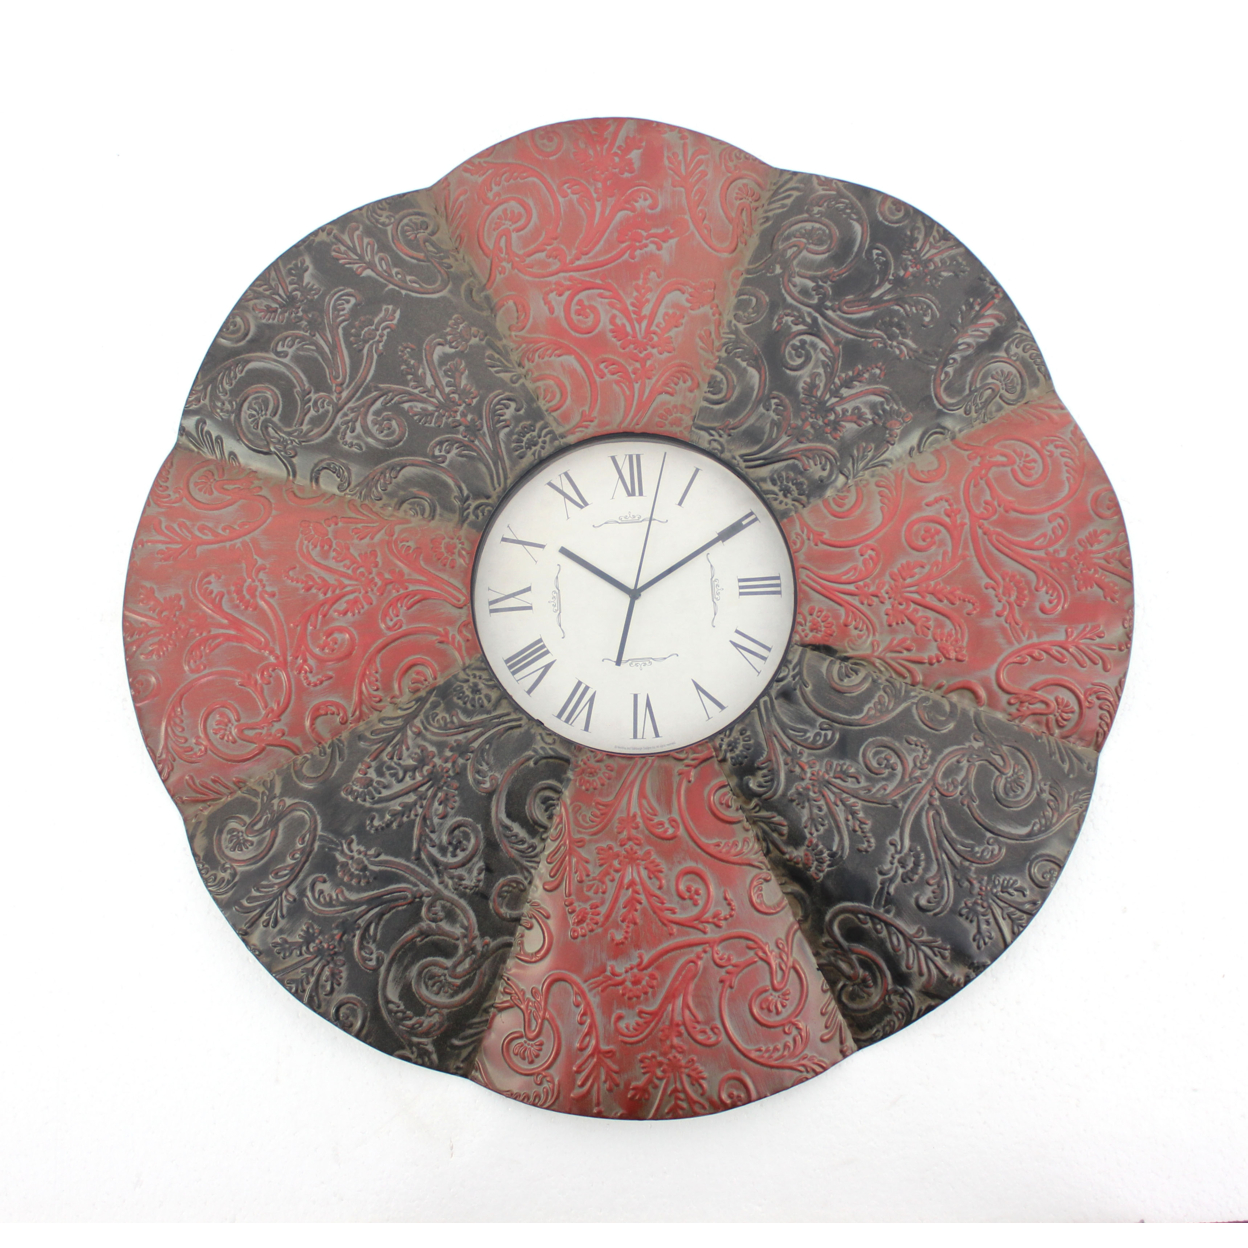 Blooming Flower Design Metal Wall Clock With Scroll Motifs, Red And Black- Saltoro Sherpi